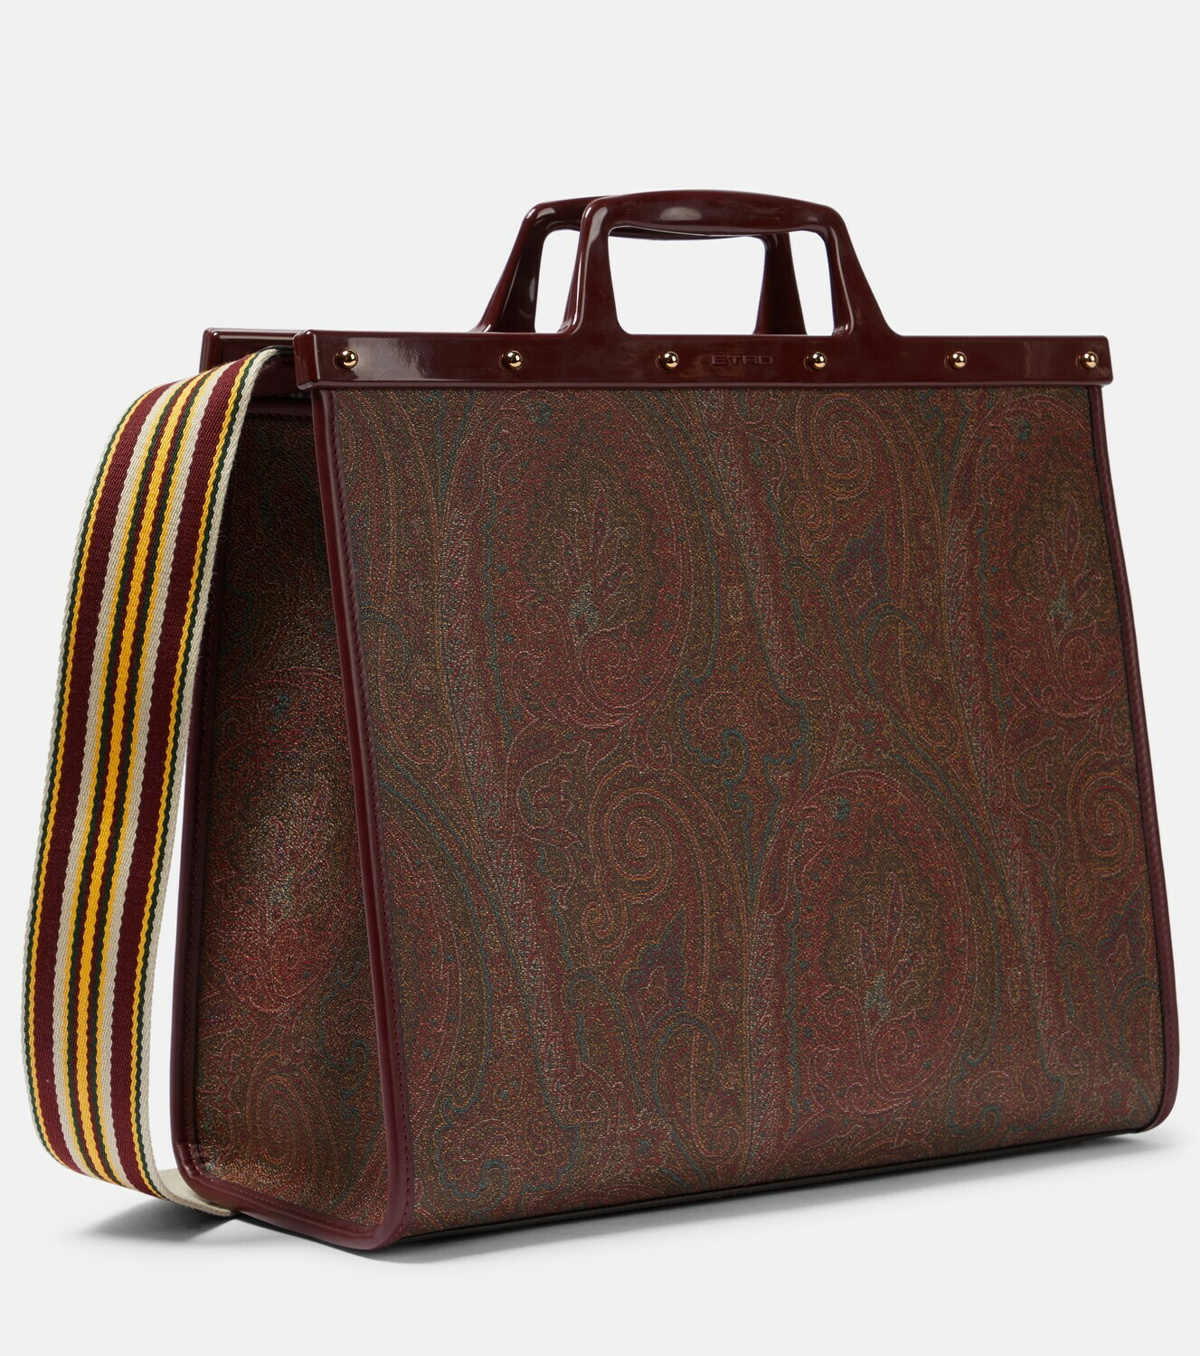 ETRO: Love Trotter bag in coated cotton - Burgundy